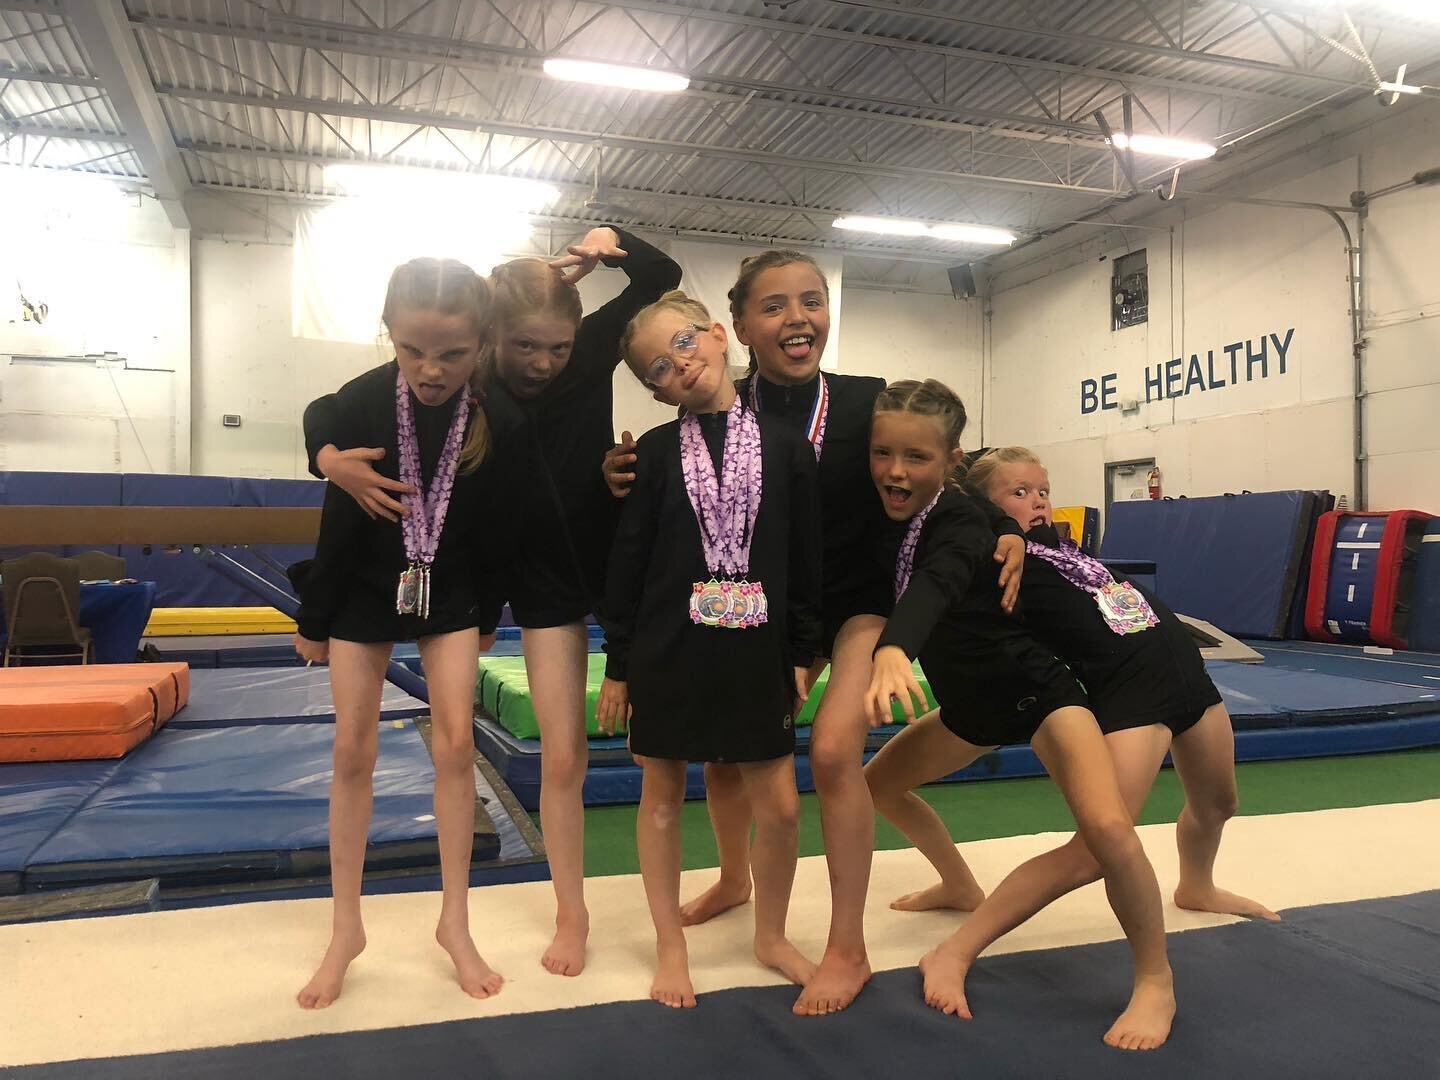 The Bronze team did awesome at their meet today!! Shout out to Arlow for winning 1st place on Vault!! 

#arkvalleyathletics #xcel #bronze